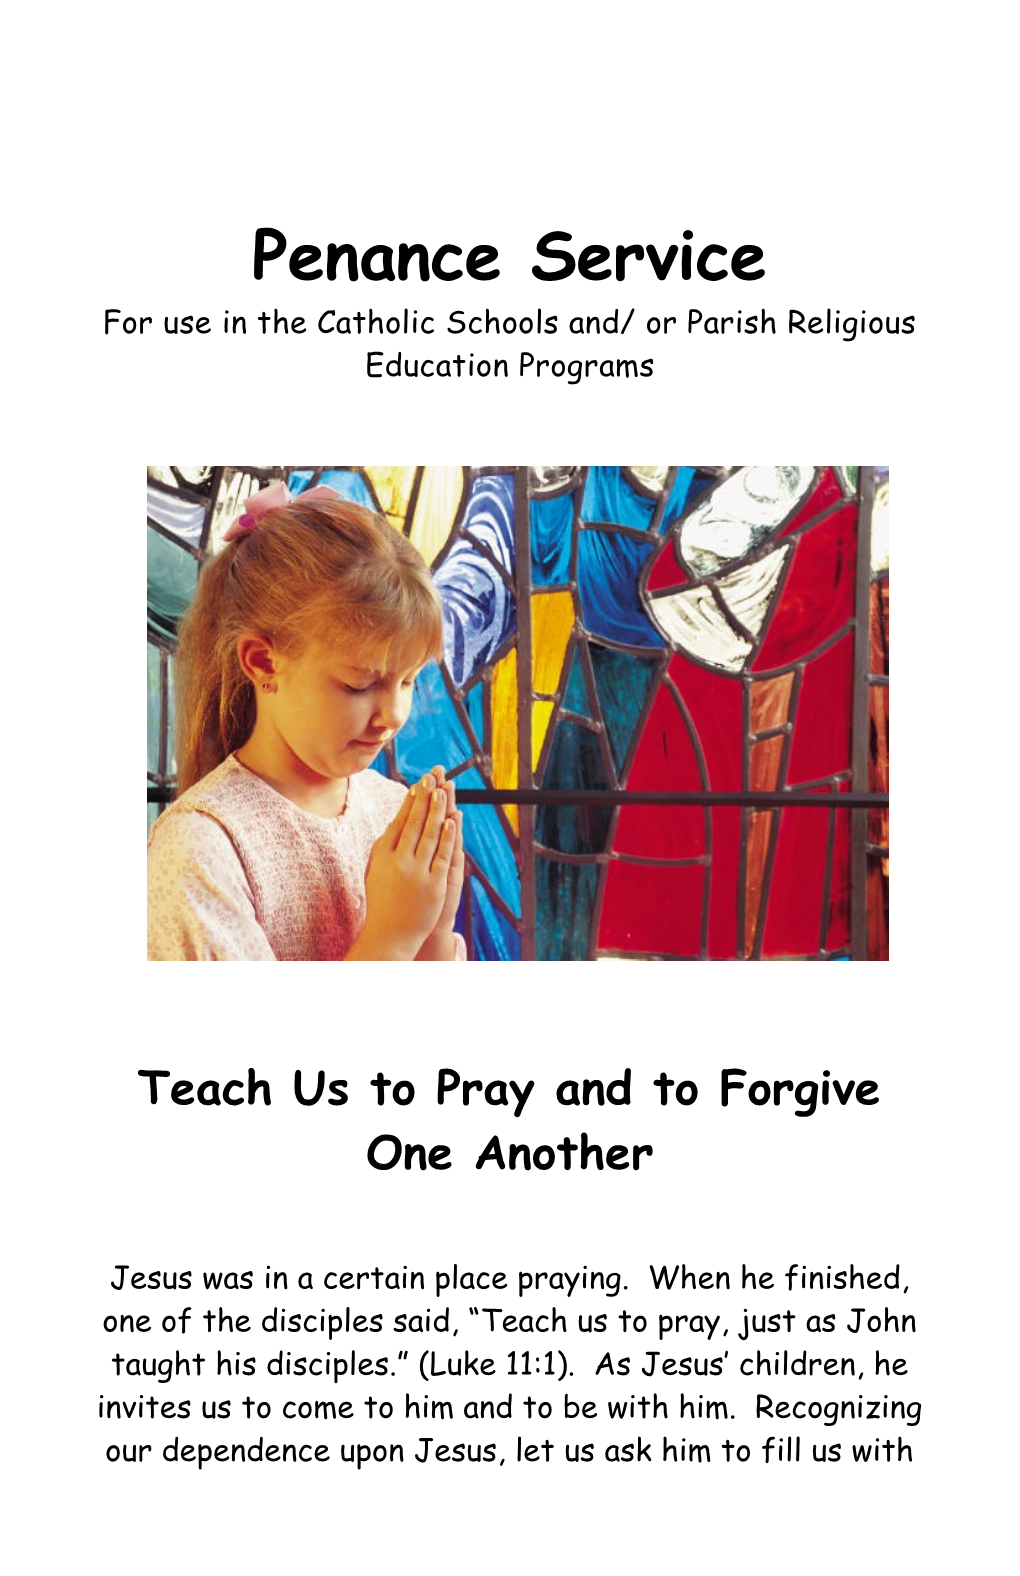 Teach Us to Pray and to Forgive One Another